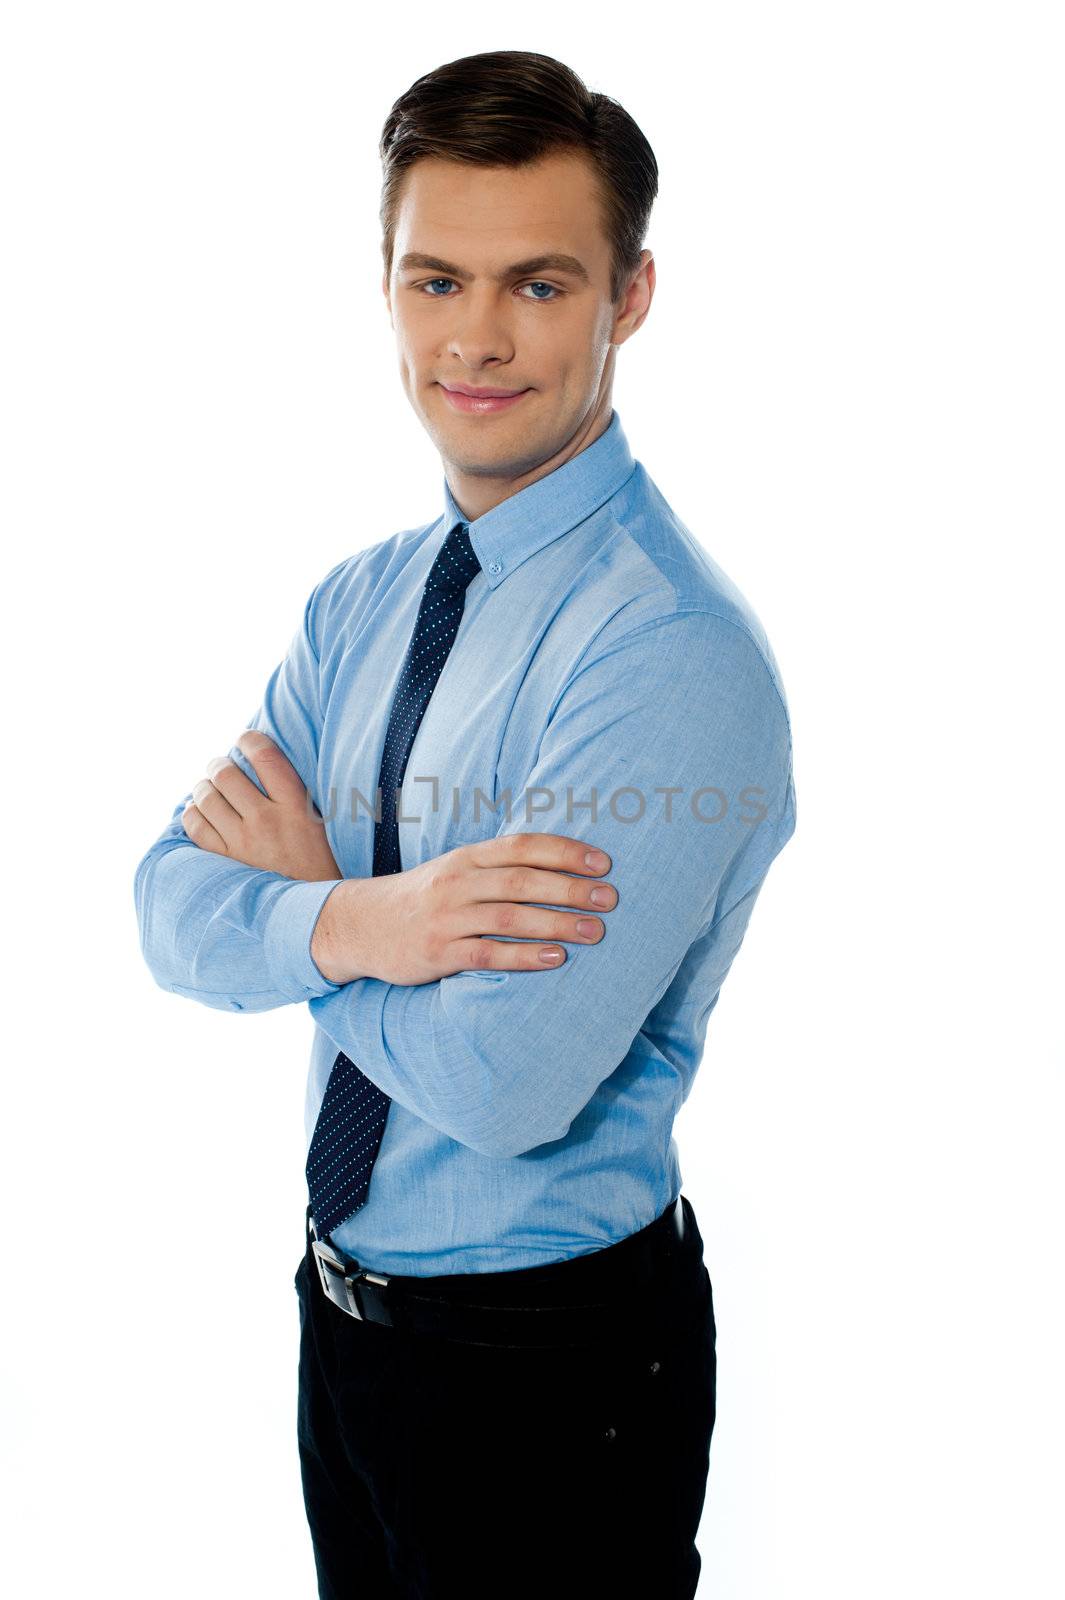 Executive standing isolated with folded hands and smiling at camera